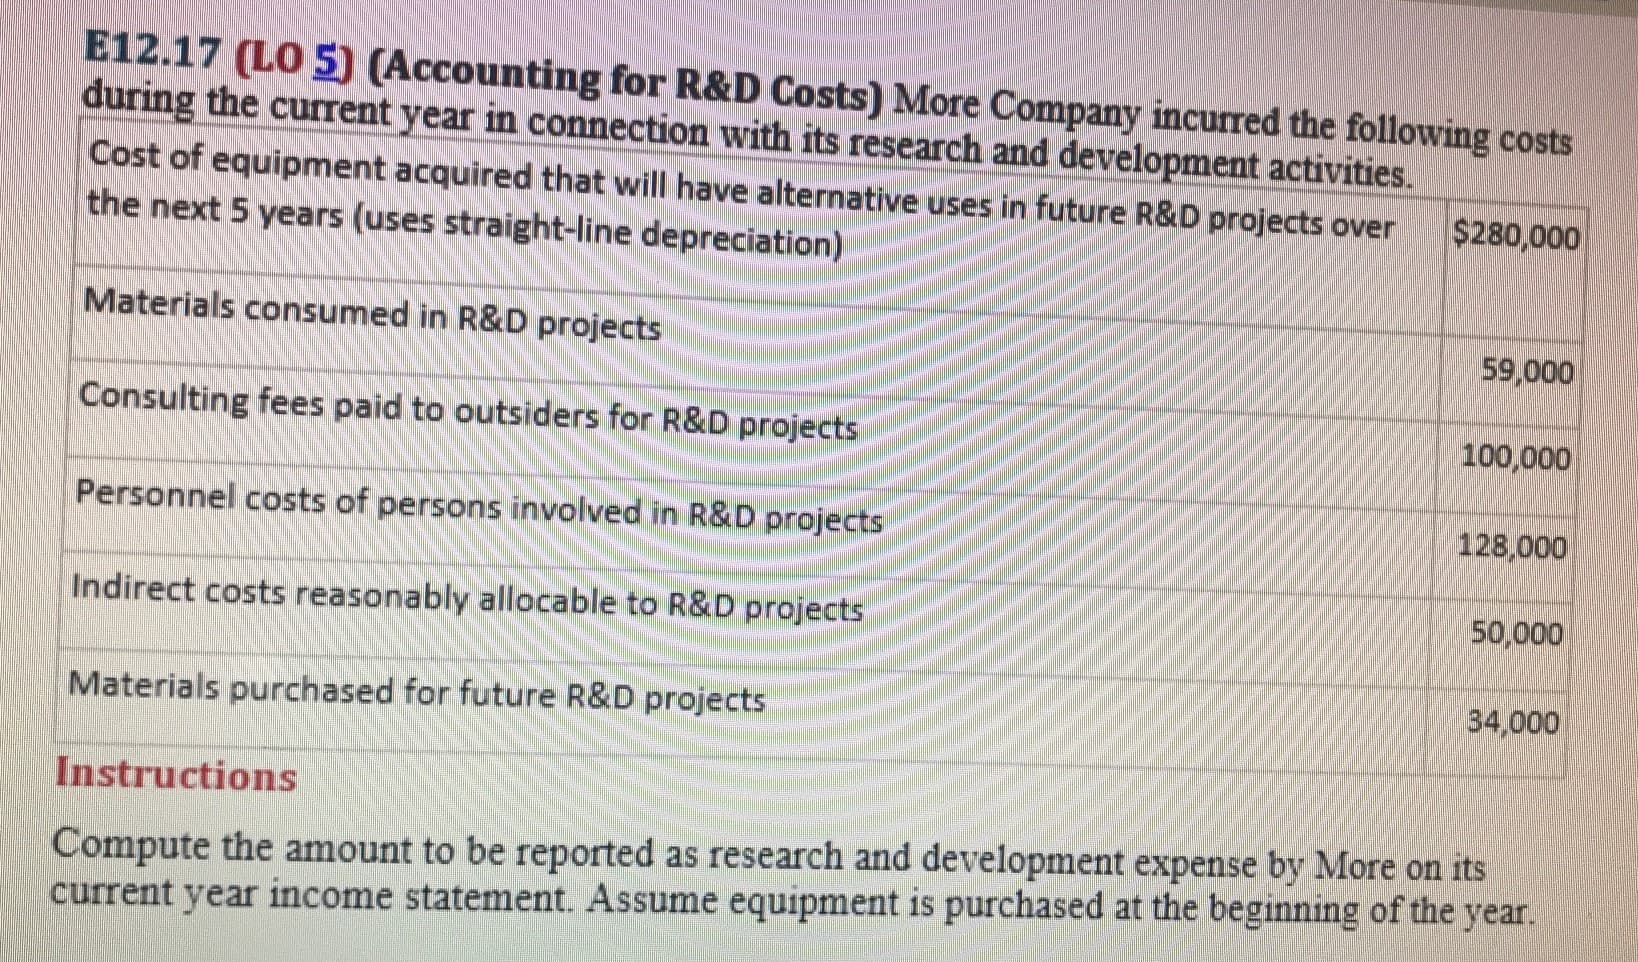 E12.17 (LO 5) (Accounting for R&D Costs) More Company incurred the following costs
during the current year in connection with its research and development activities.
Cost of equipment acquired that will have alternative uses in future R&D projects over
the next 5 years (uses straight-line depreciation)
$280,000
Materials consumed in R&D projects
59,000
Consulting fees paid to outsiders for R&D projects
100,000
Personnel costs of persons involved in R&D projects
128,000
Indirect costs reasonably allocable to R&D projects
50,000
Materials purchased for future R&D projects
34,000
Instructions
Compute the amount to be reported as research and development expense by More on its
current year income statement. Assume equipment is purchased at the beginning of the year.
